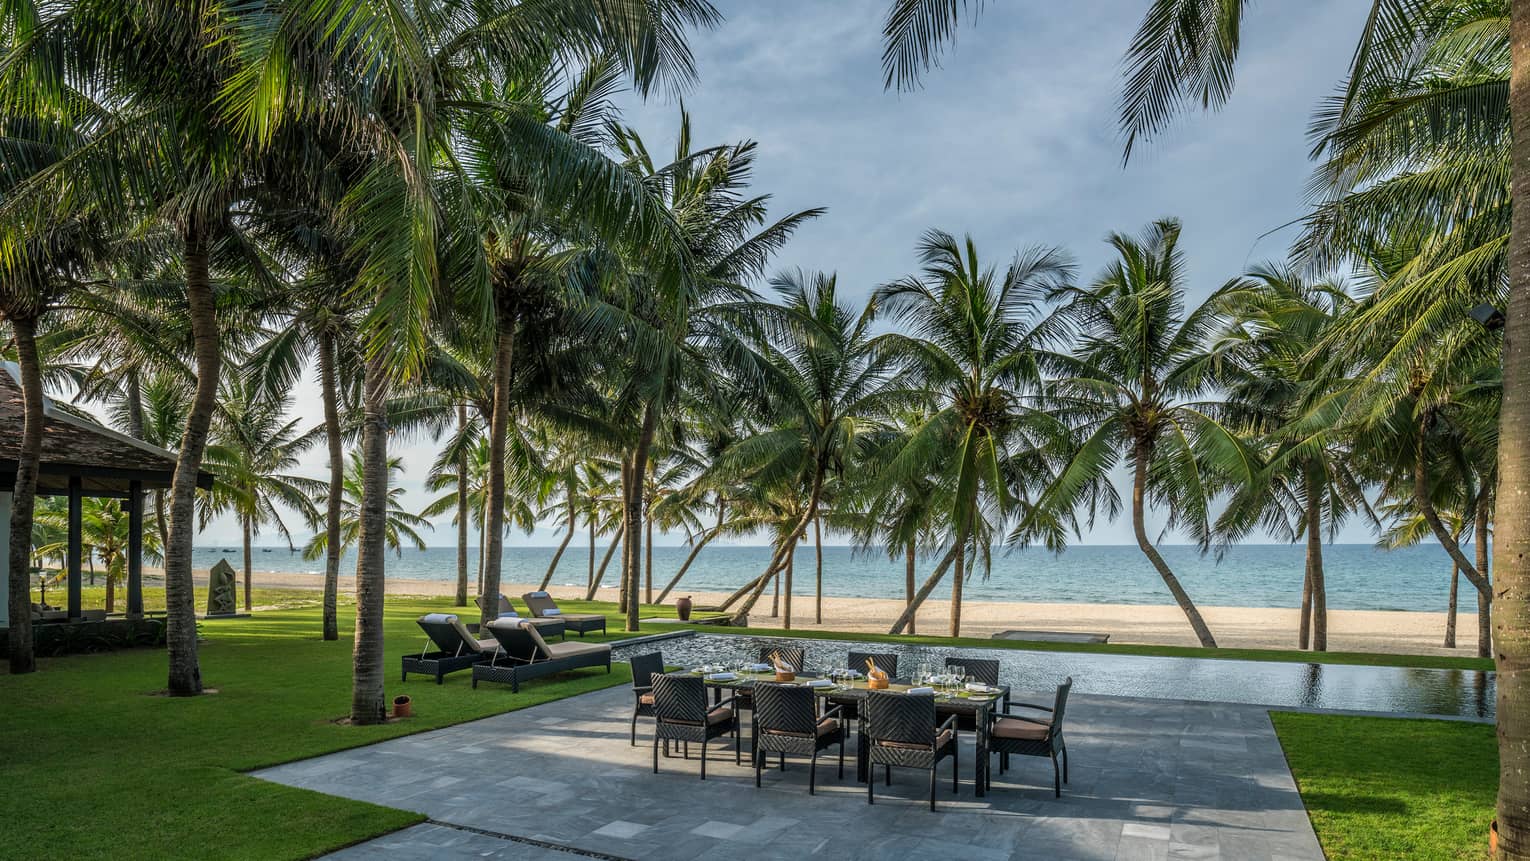 Beachfront Villa large stone patio with private dining table, lounge chairs under palms